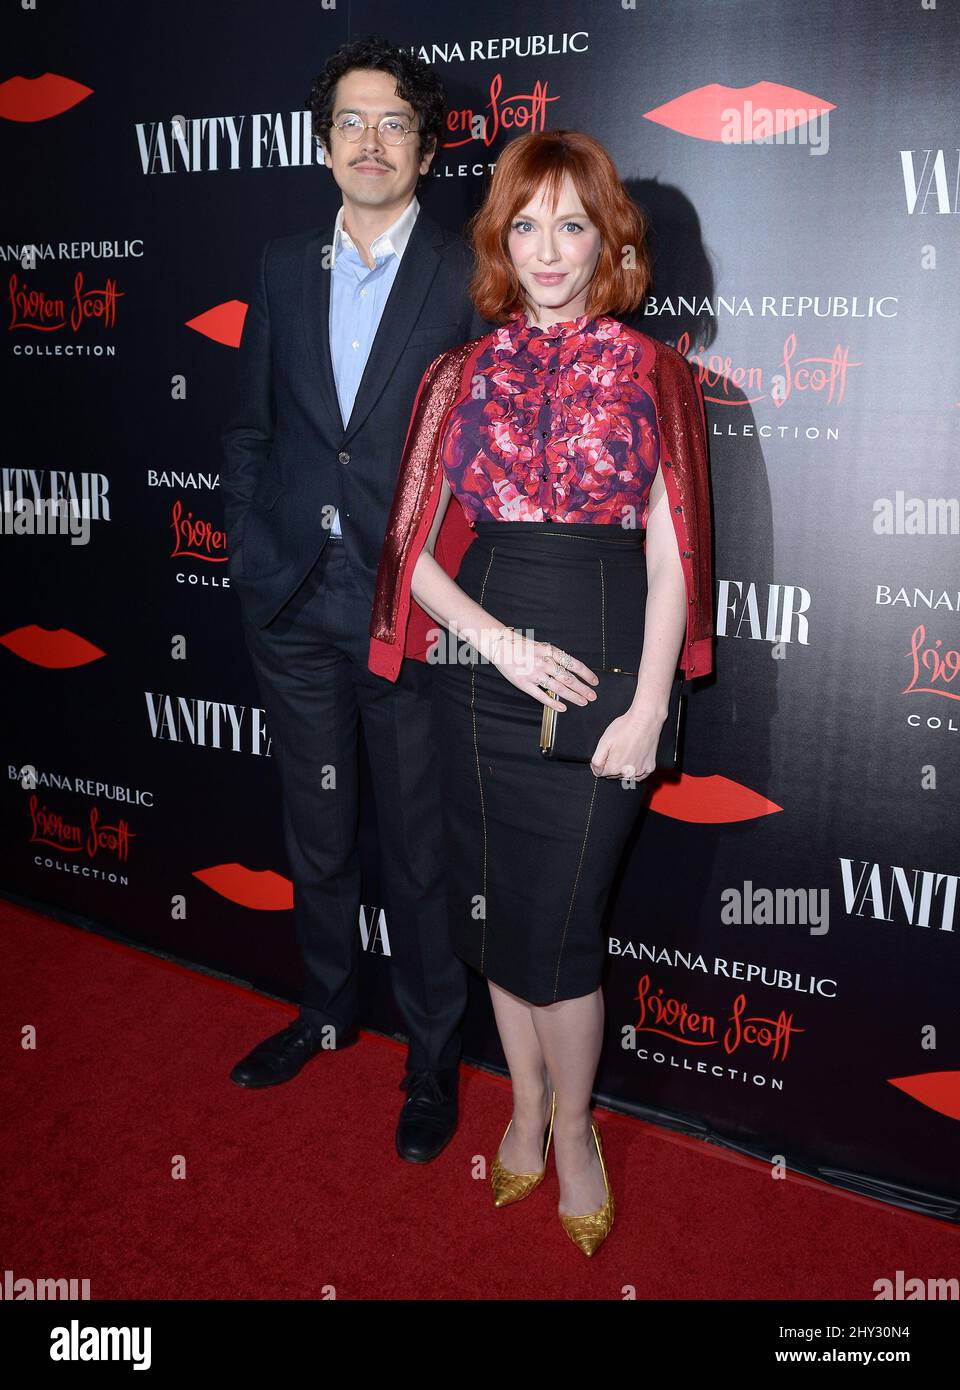 Christina Hendricks and Geoffrey Arend attending the Banana Republic L'Wren Scott Collection launch at the Chateau Marmont in Los Angeles, California. Stock Photo